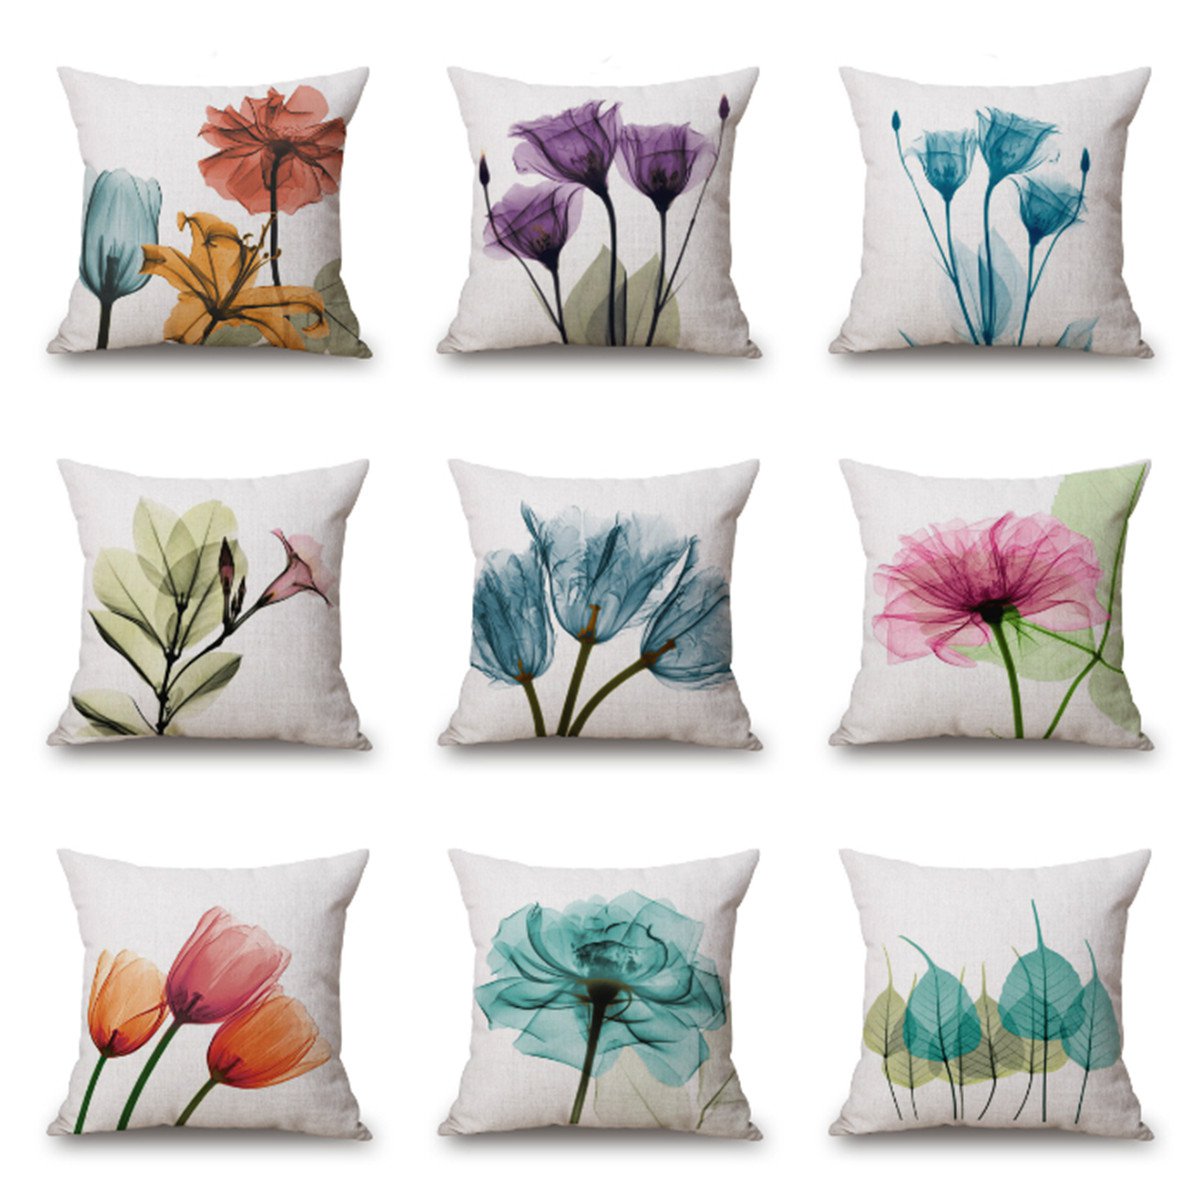 Ink-Painting-Flowers-Cotton-Linen-Pillow-Case-Tulips-Sofa-Cushion-Cover-45x45cm-1161674-1